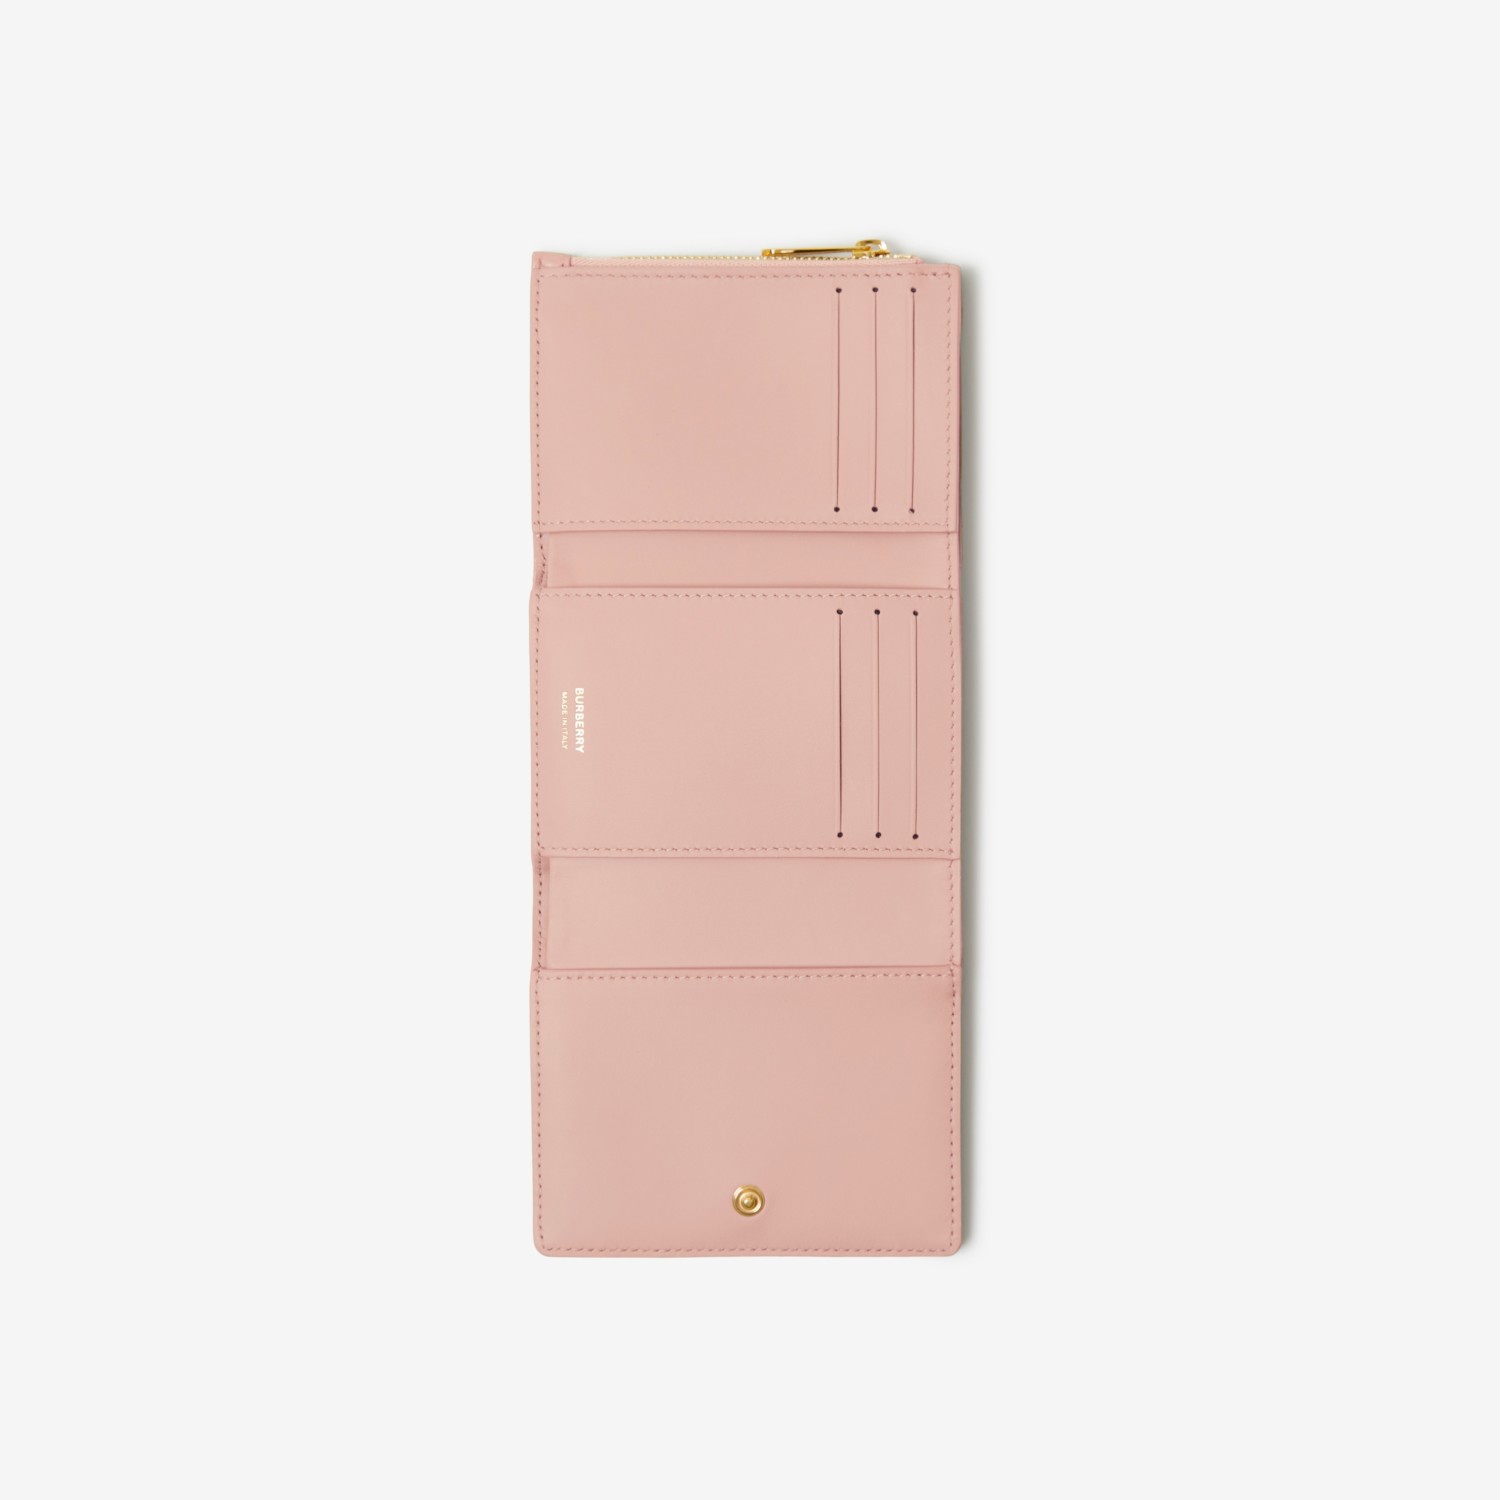 Burberry Pink Lola Wallet Burberry